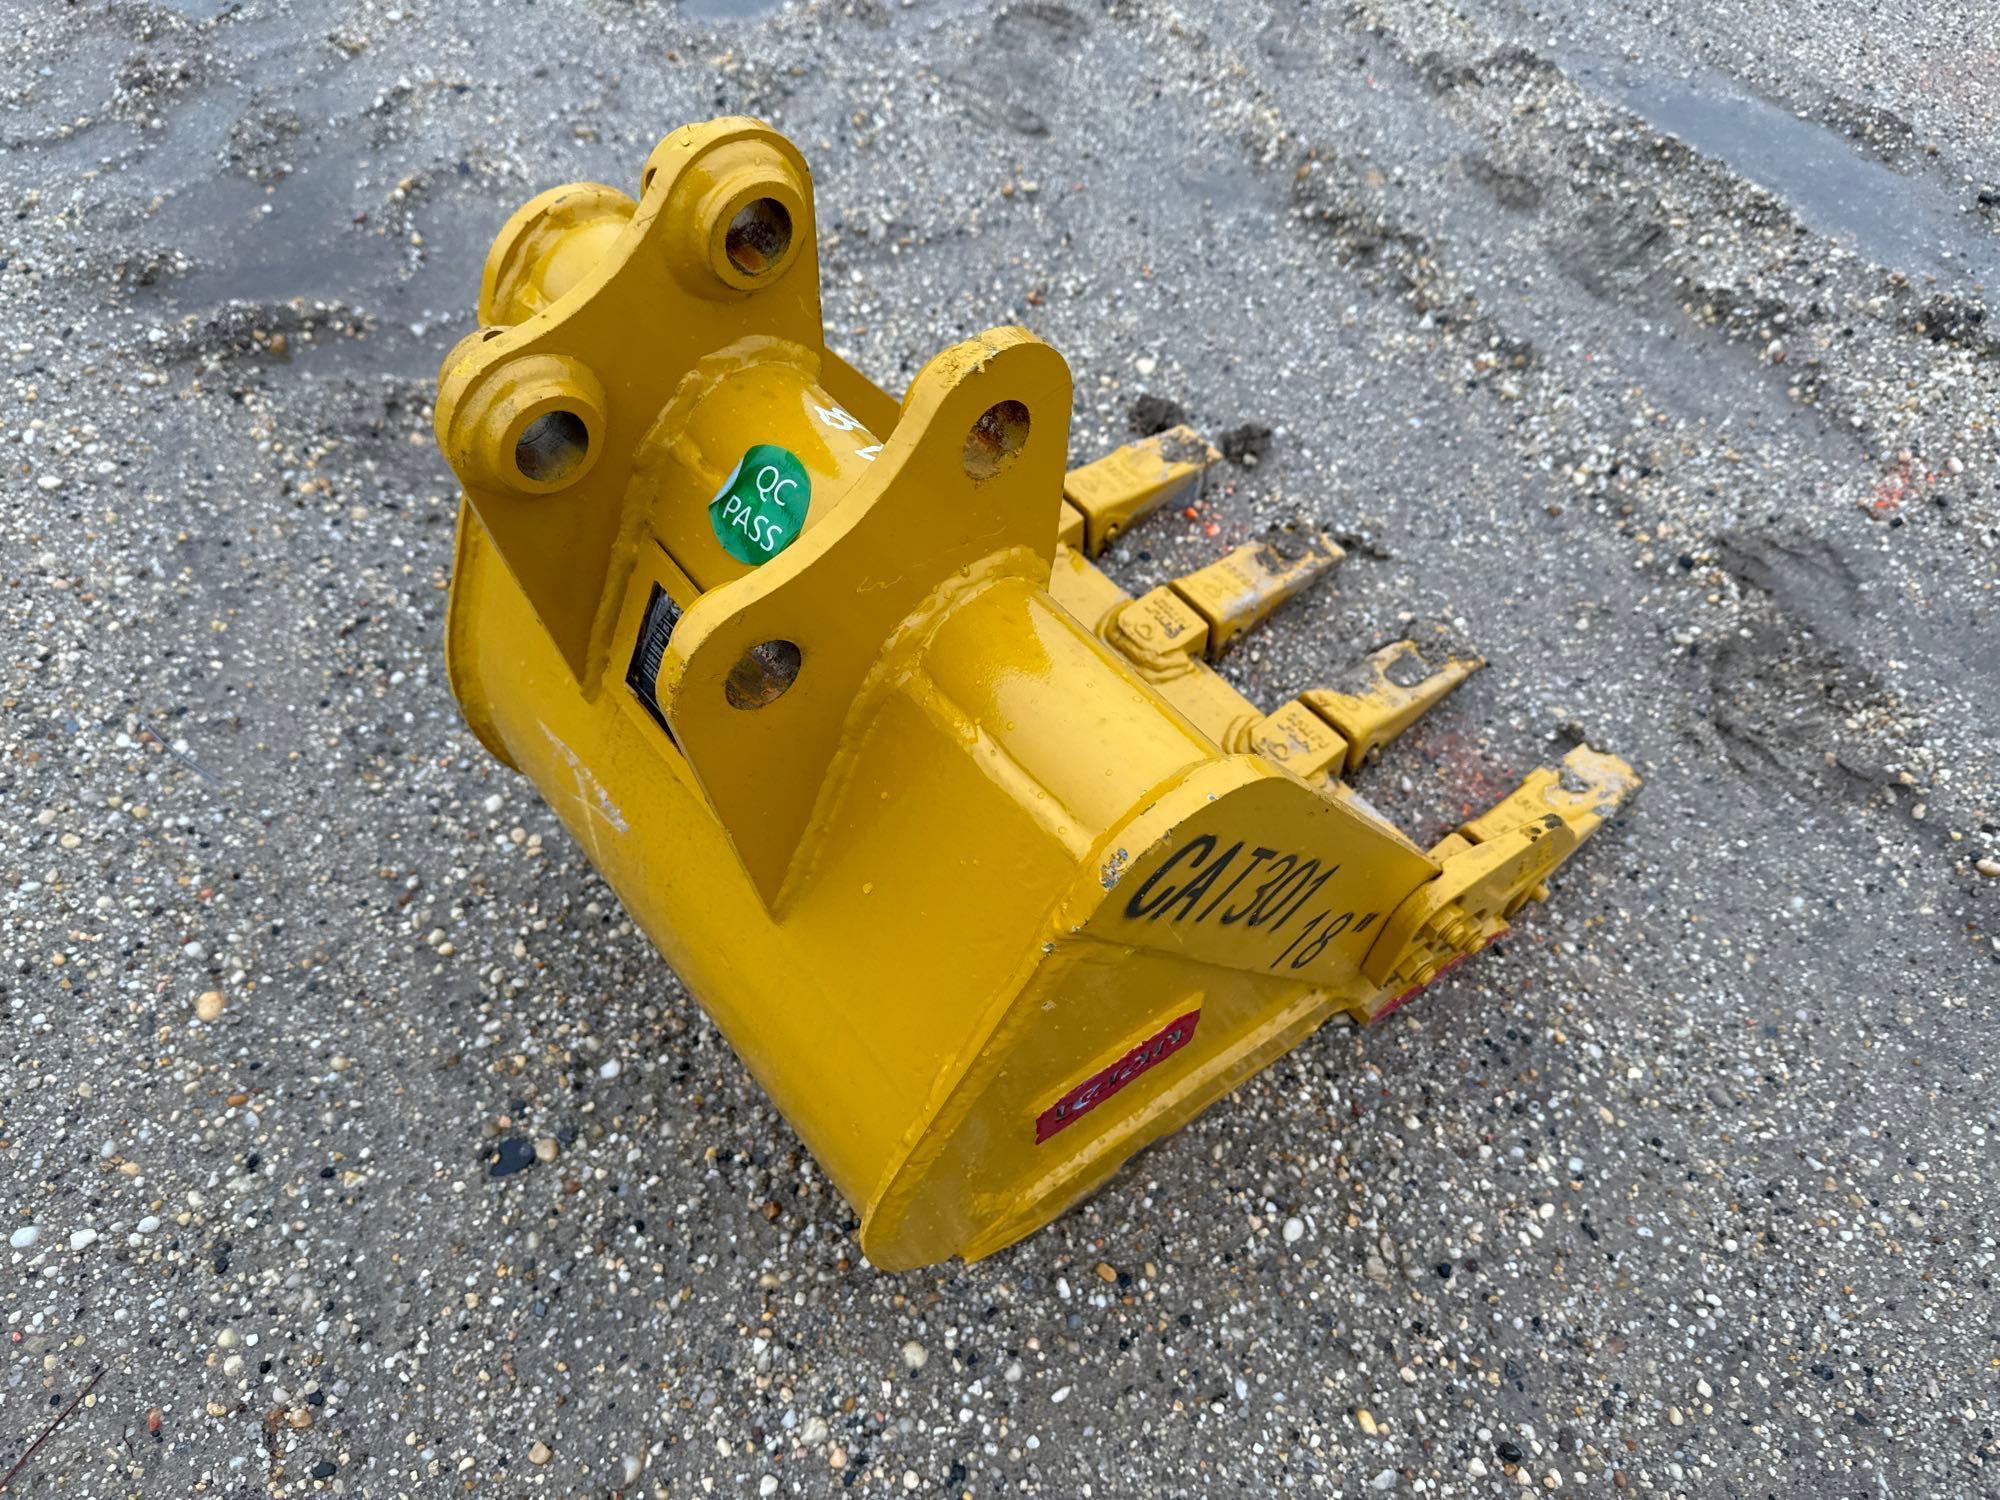 NEW TERAN 18IN. DIGGING BUCKET EXCAVATOR BUCKET for CAT 301 with Side Cutters and 4HD Tips. SN-0708